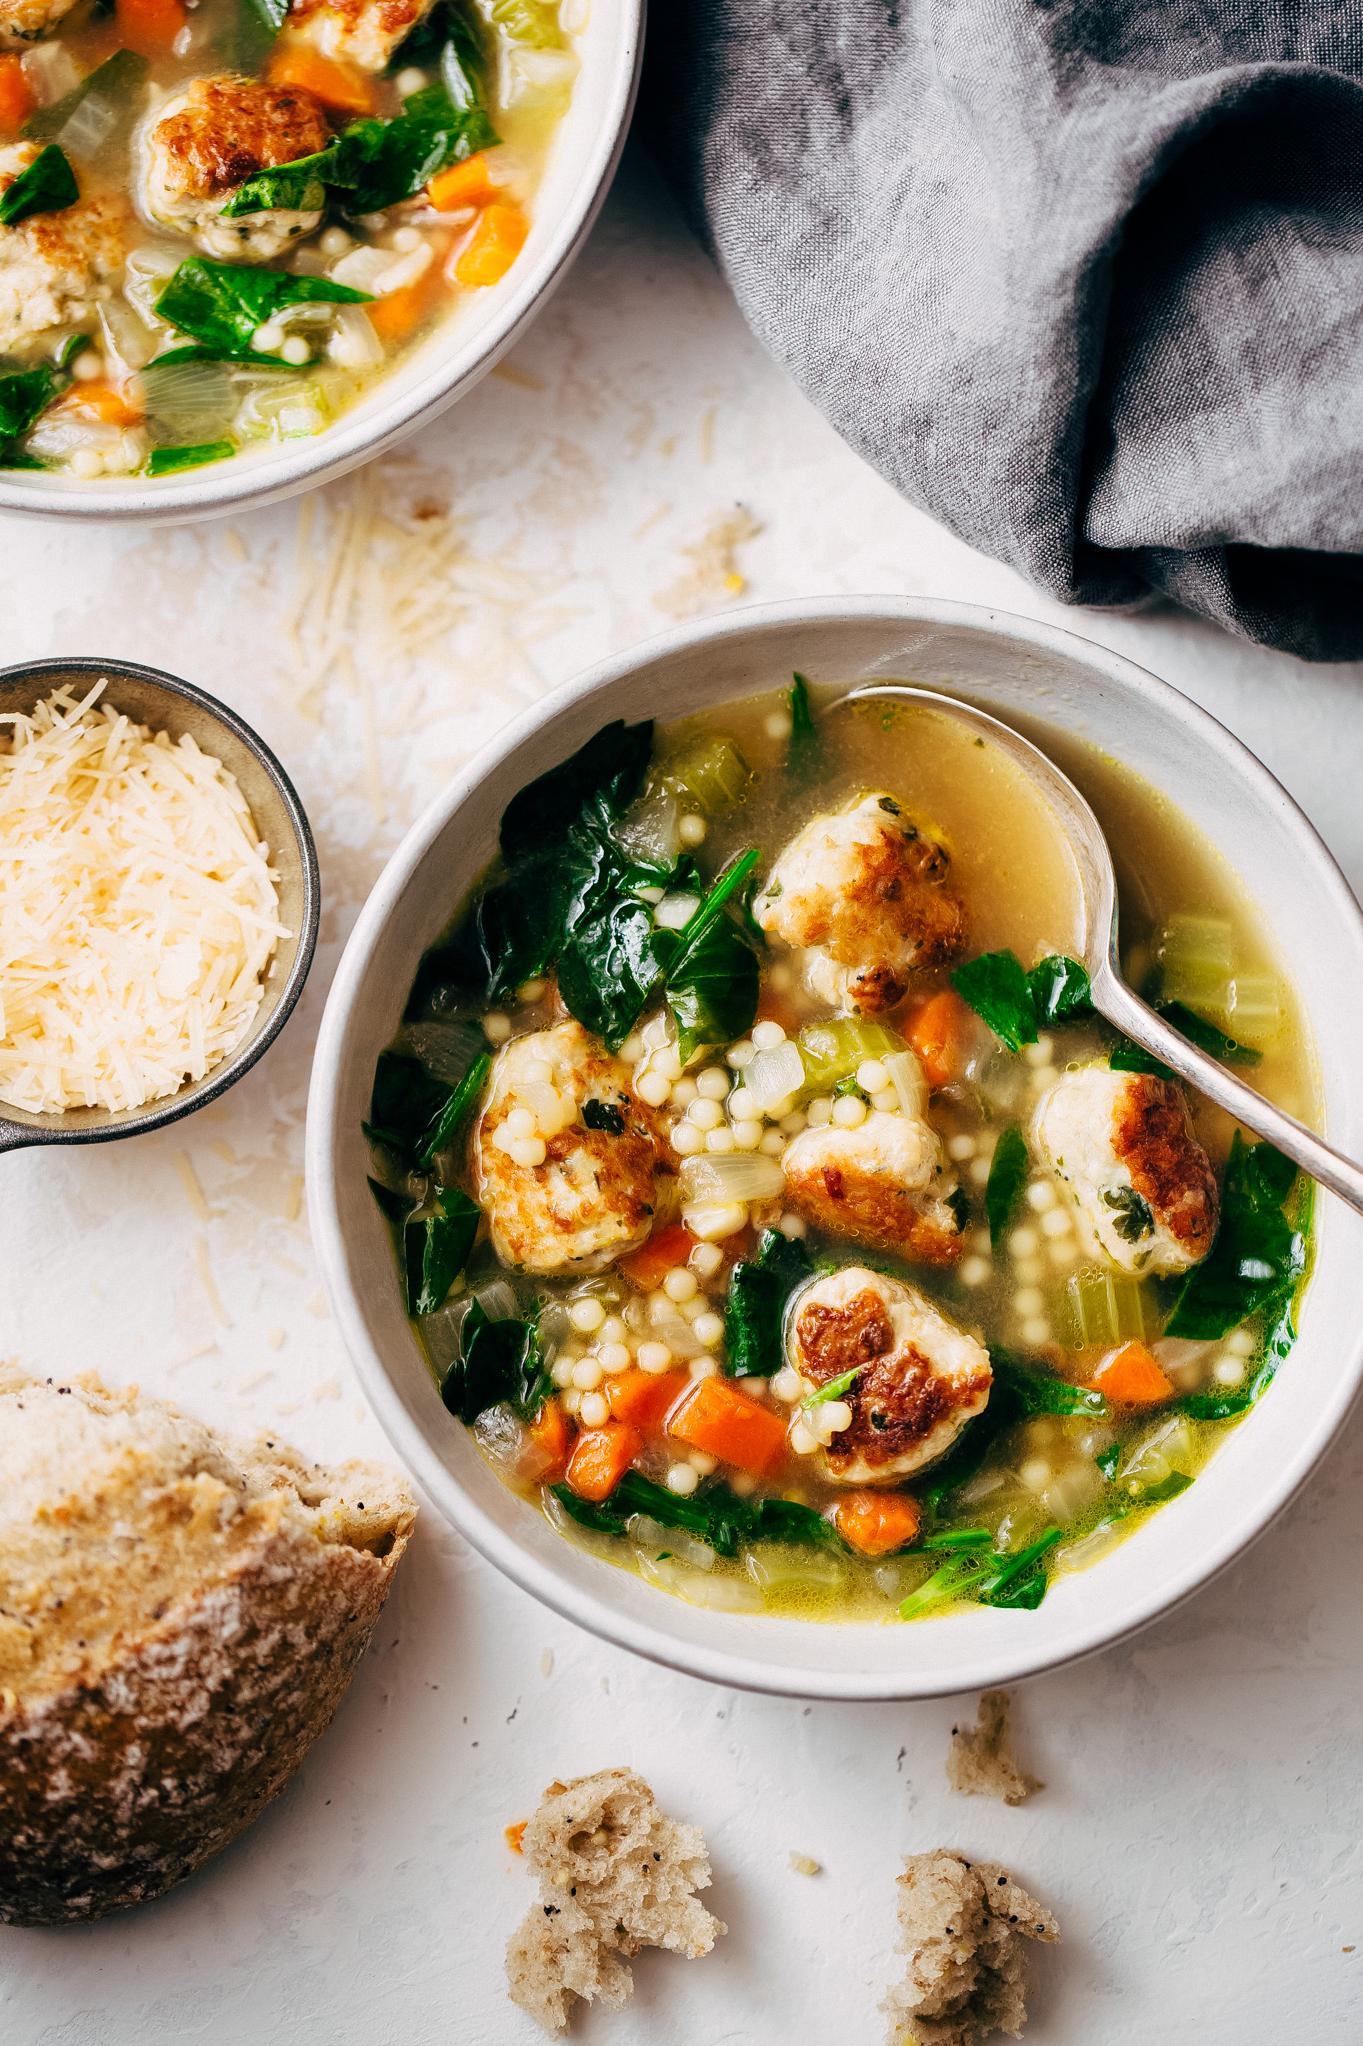  Show your love for comfort food with this delicious and filling soup.